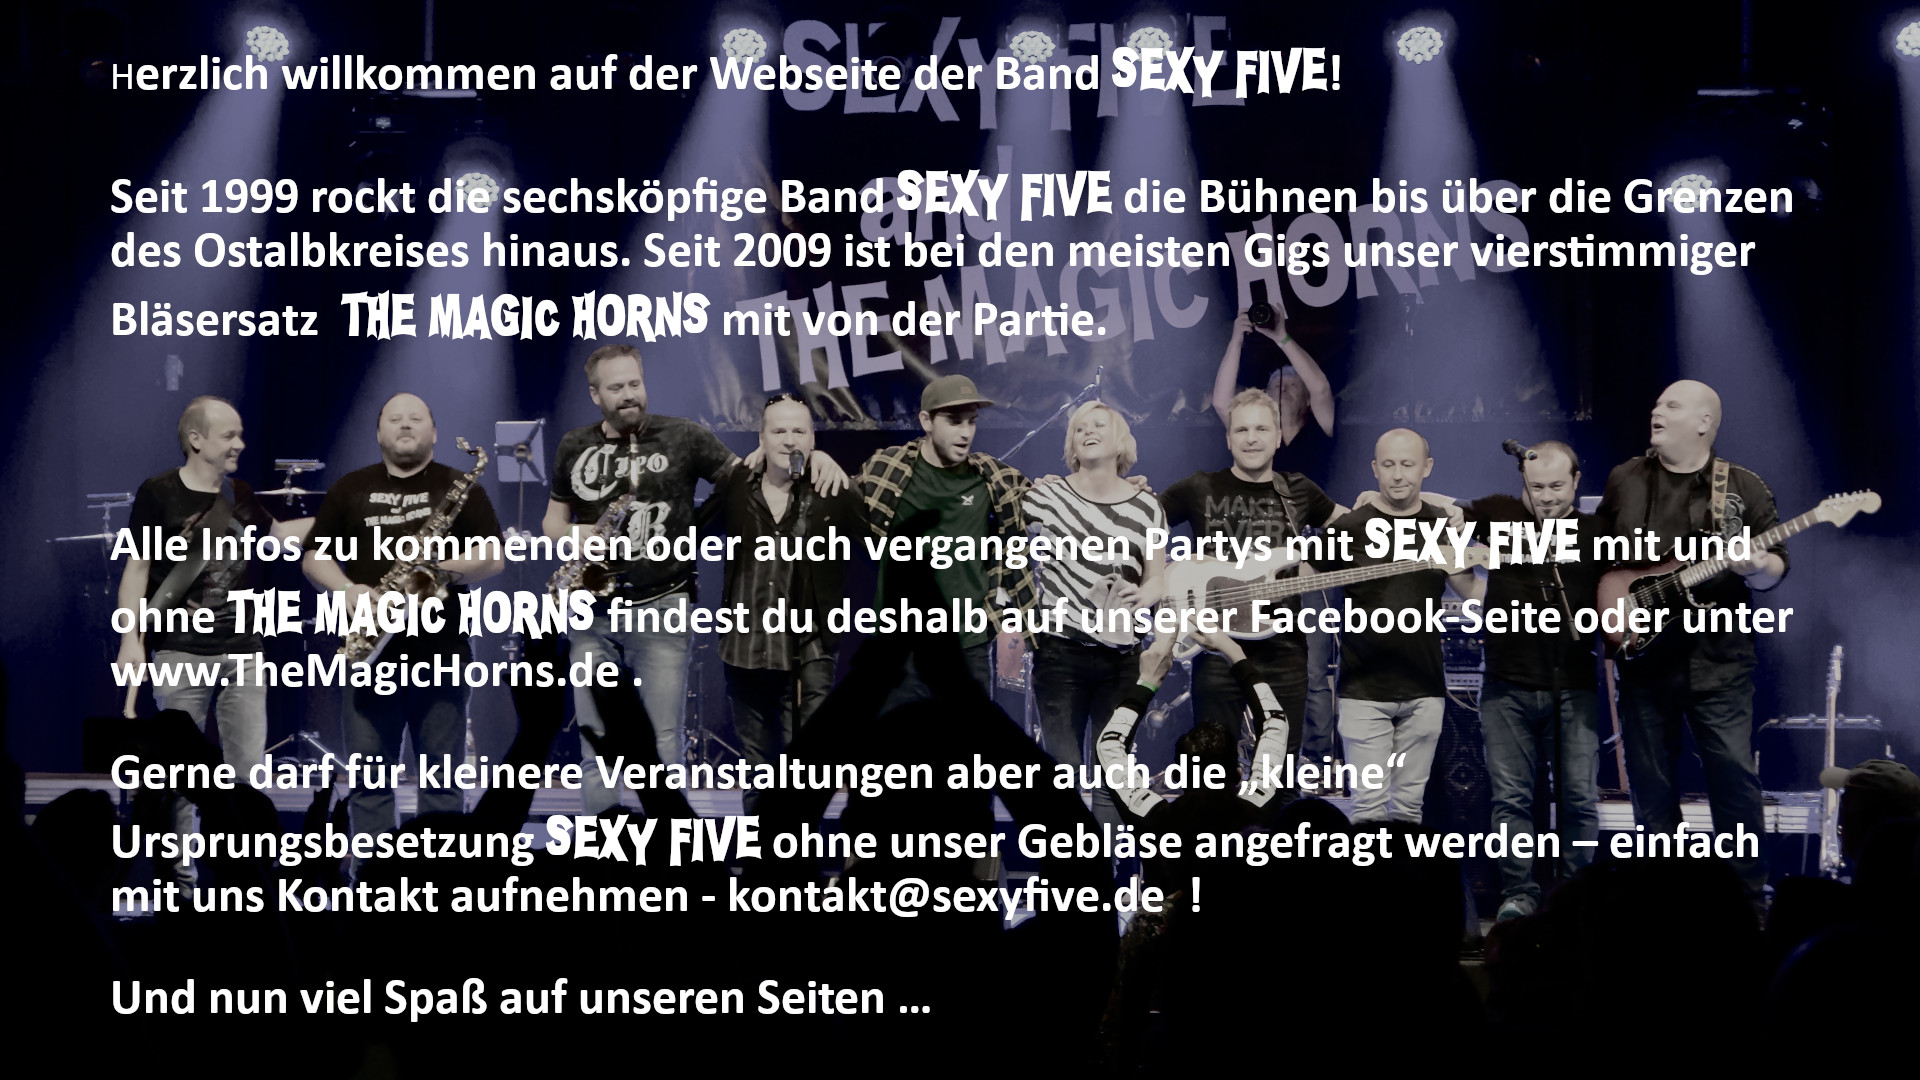 SEXY FIVE and THE MAGIC HORNS